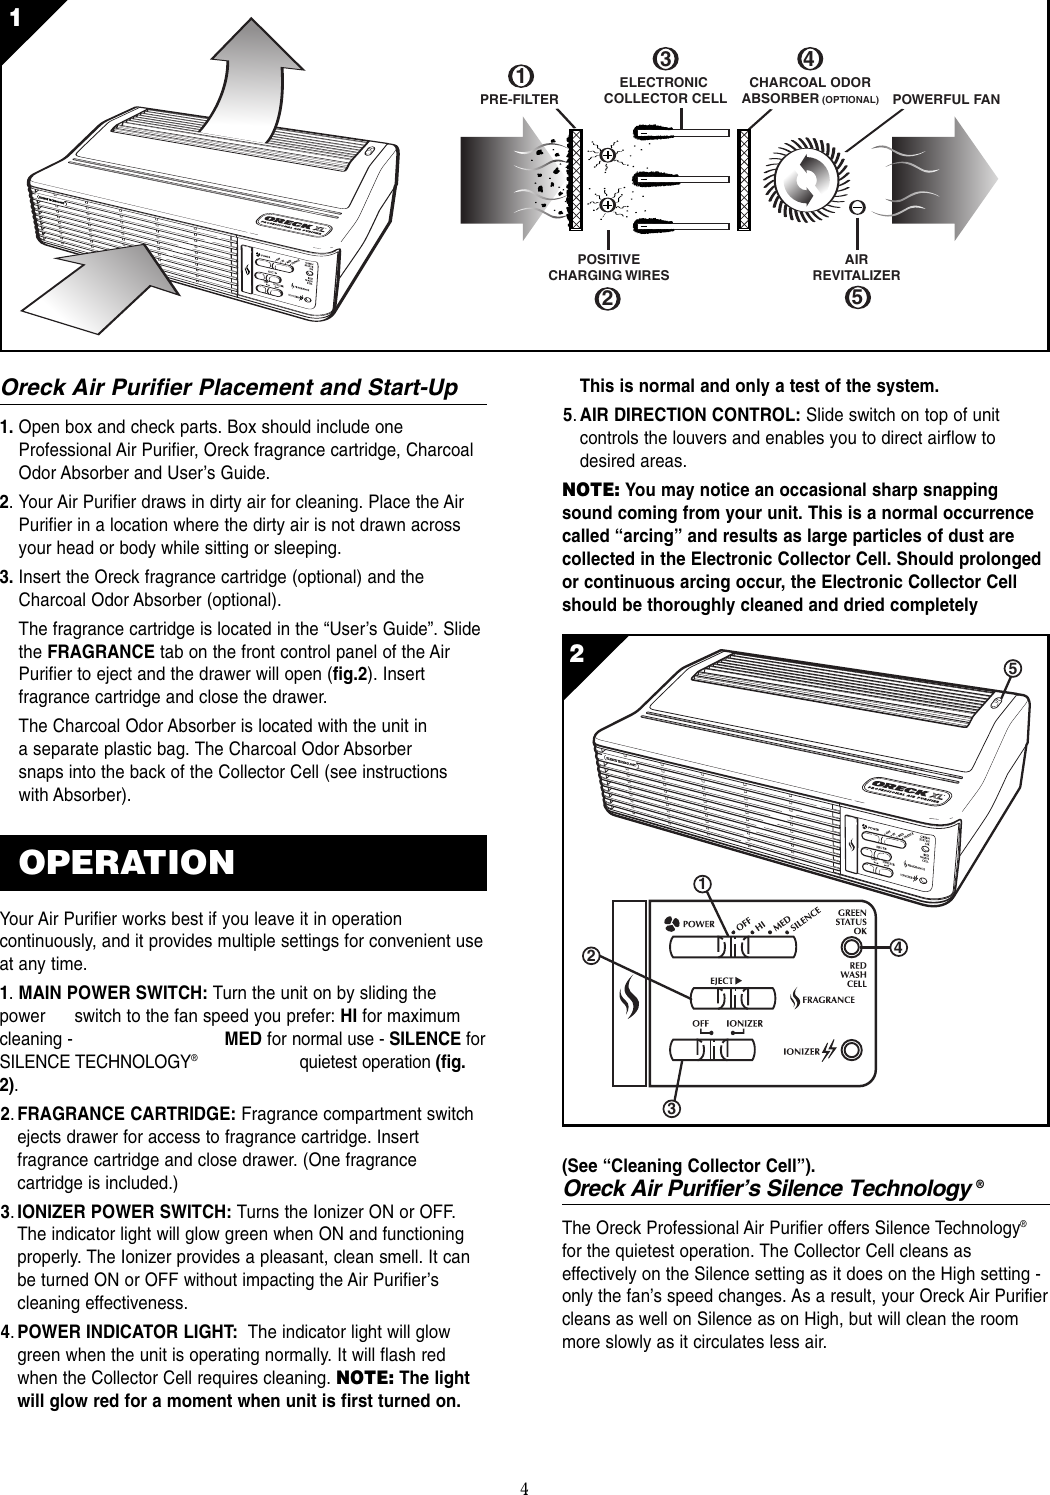 Page 4 of 8 - Oreck Oreck-Air8-Series-Users-Manual- Air 8 Manual Rev B  Oreck-air8-series-users-manual